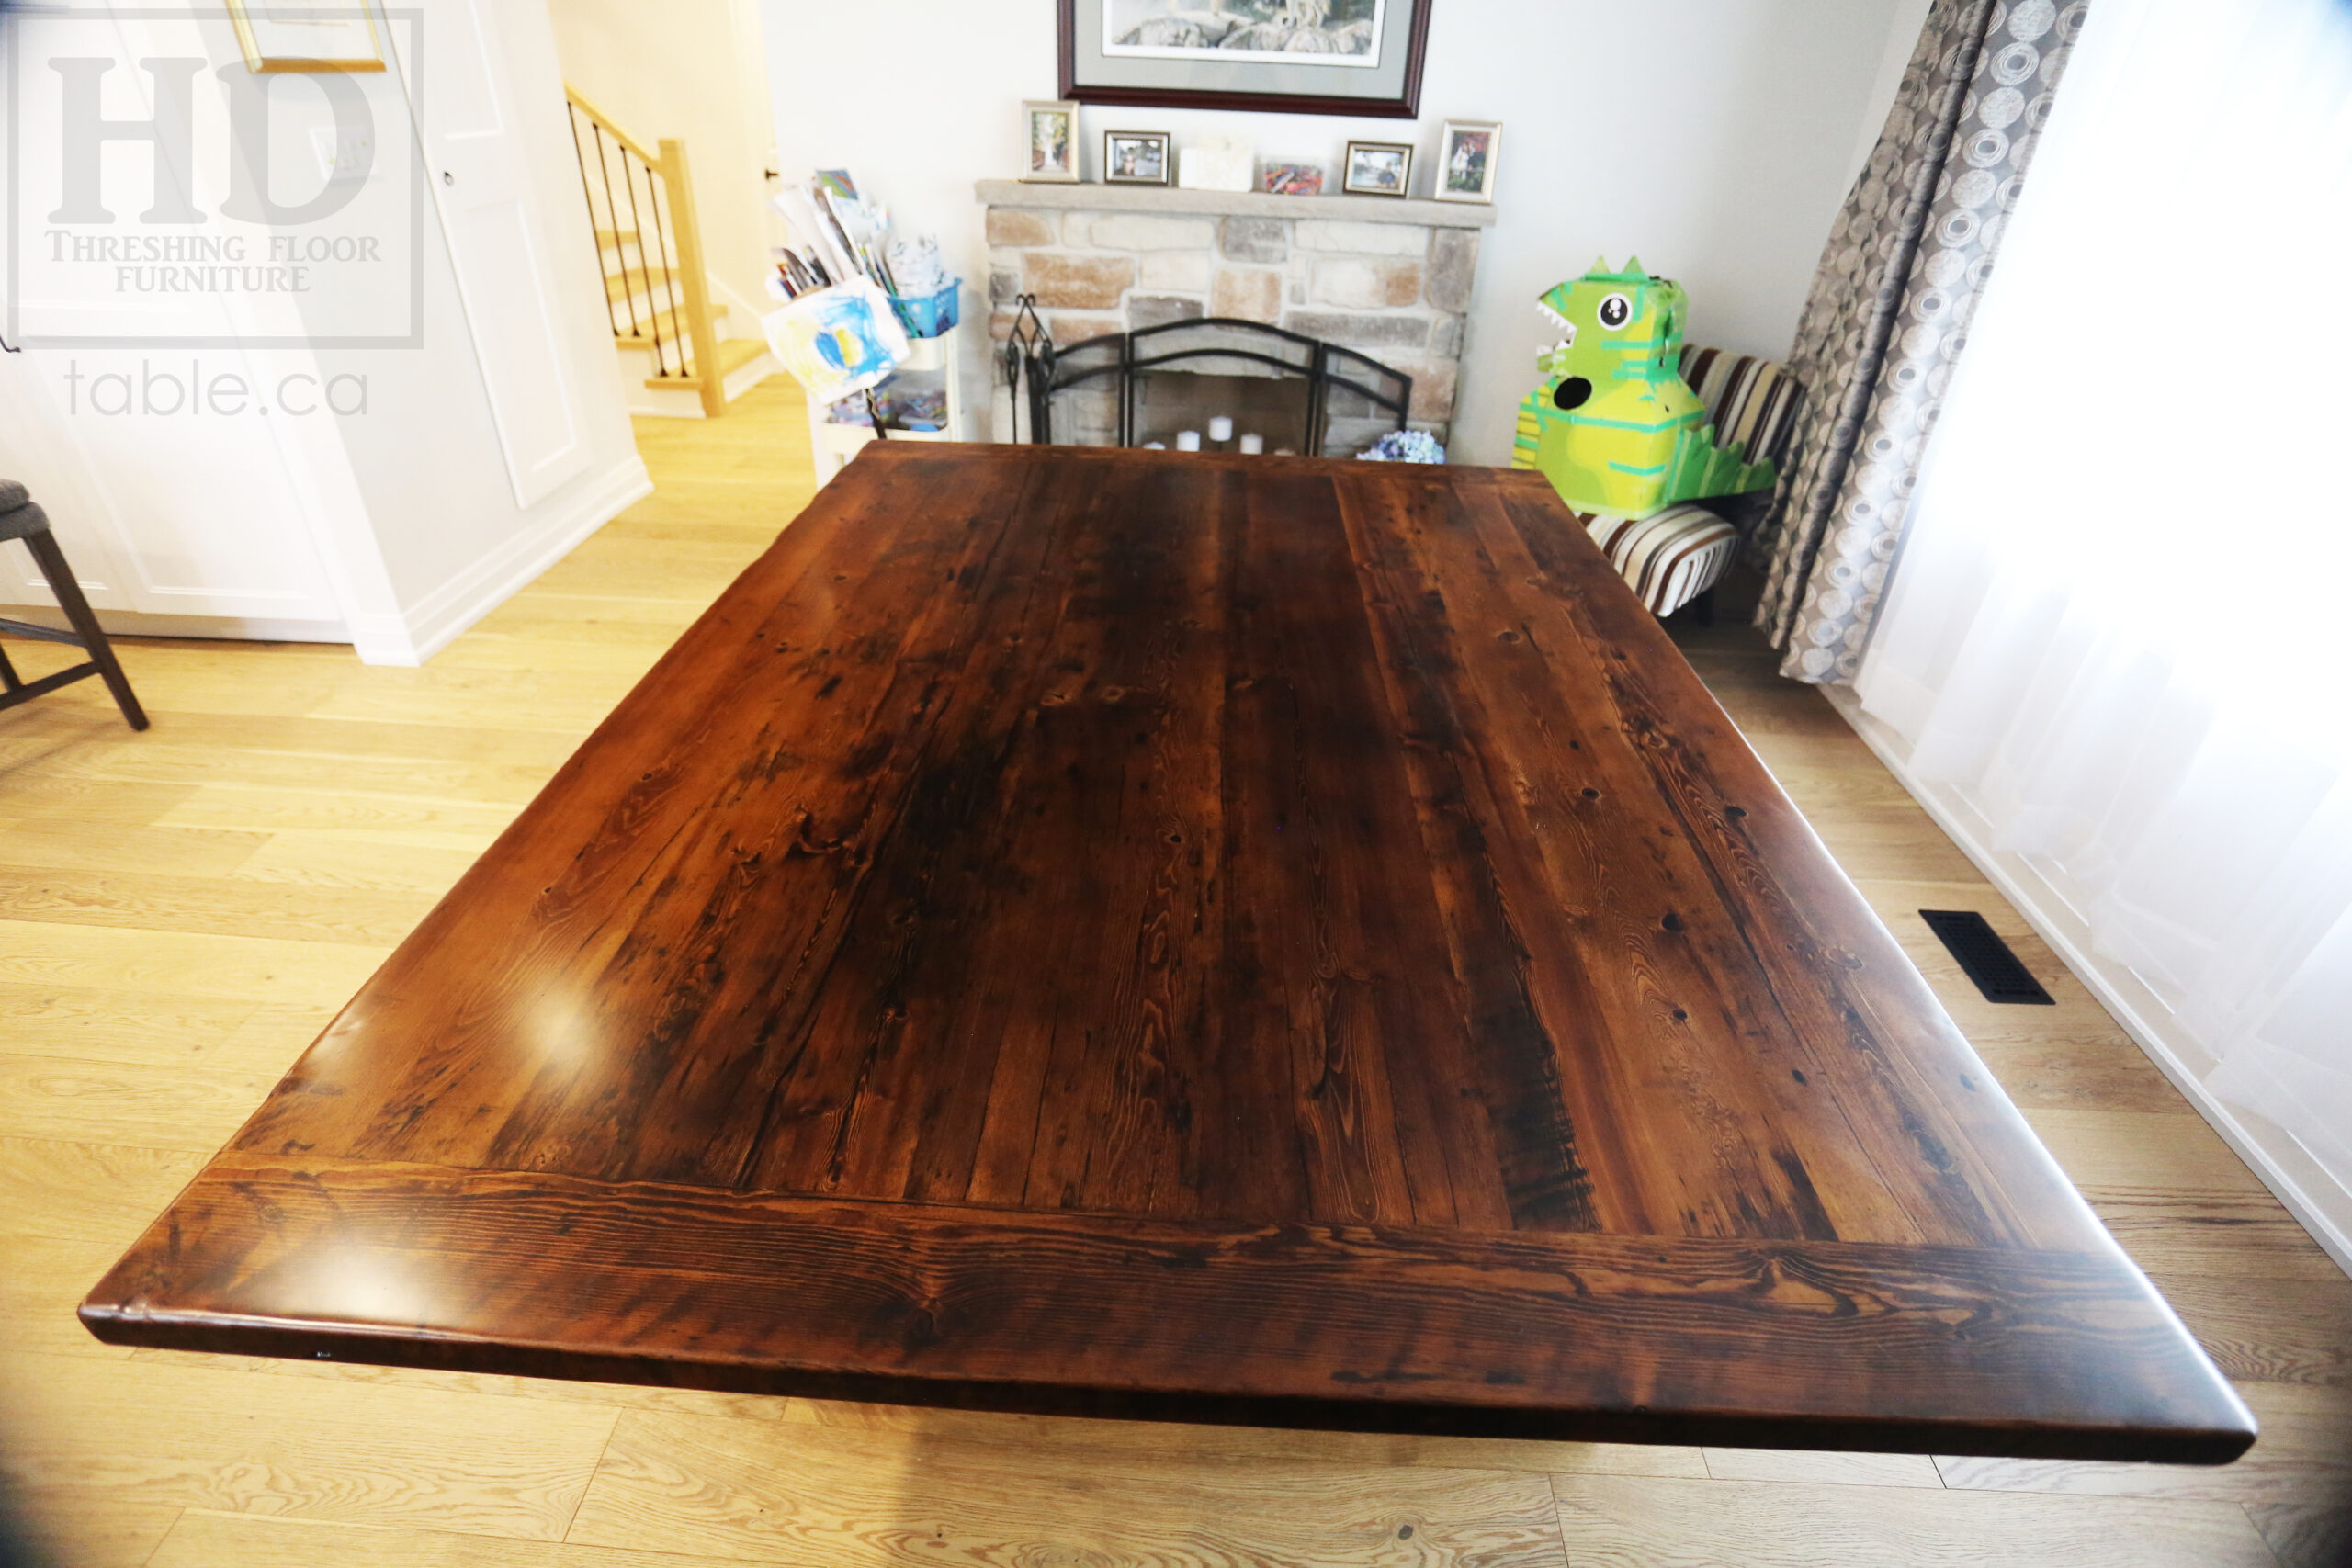 Project Summary: 7’ Reclaimed Barnwood Table we made for a Toronto, Ontario home – 60” wide – Sawbuck Base - Old Growth Ontario Hemlock Threshing Floor Construction - Original edges & distressing maintained – Bread Edge Boards – Premium epoxy + satin polyurethane finish -  www.table.ca